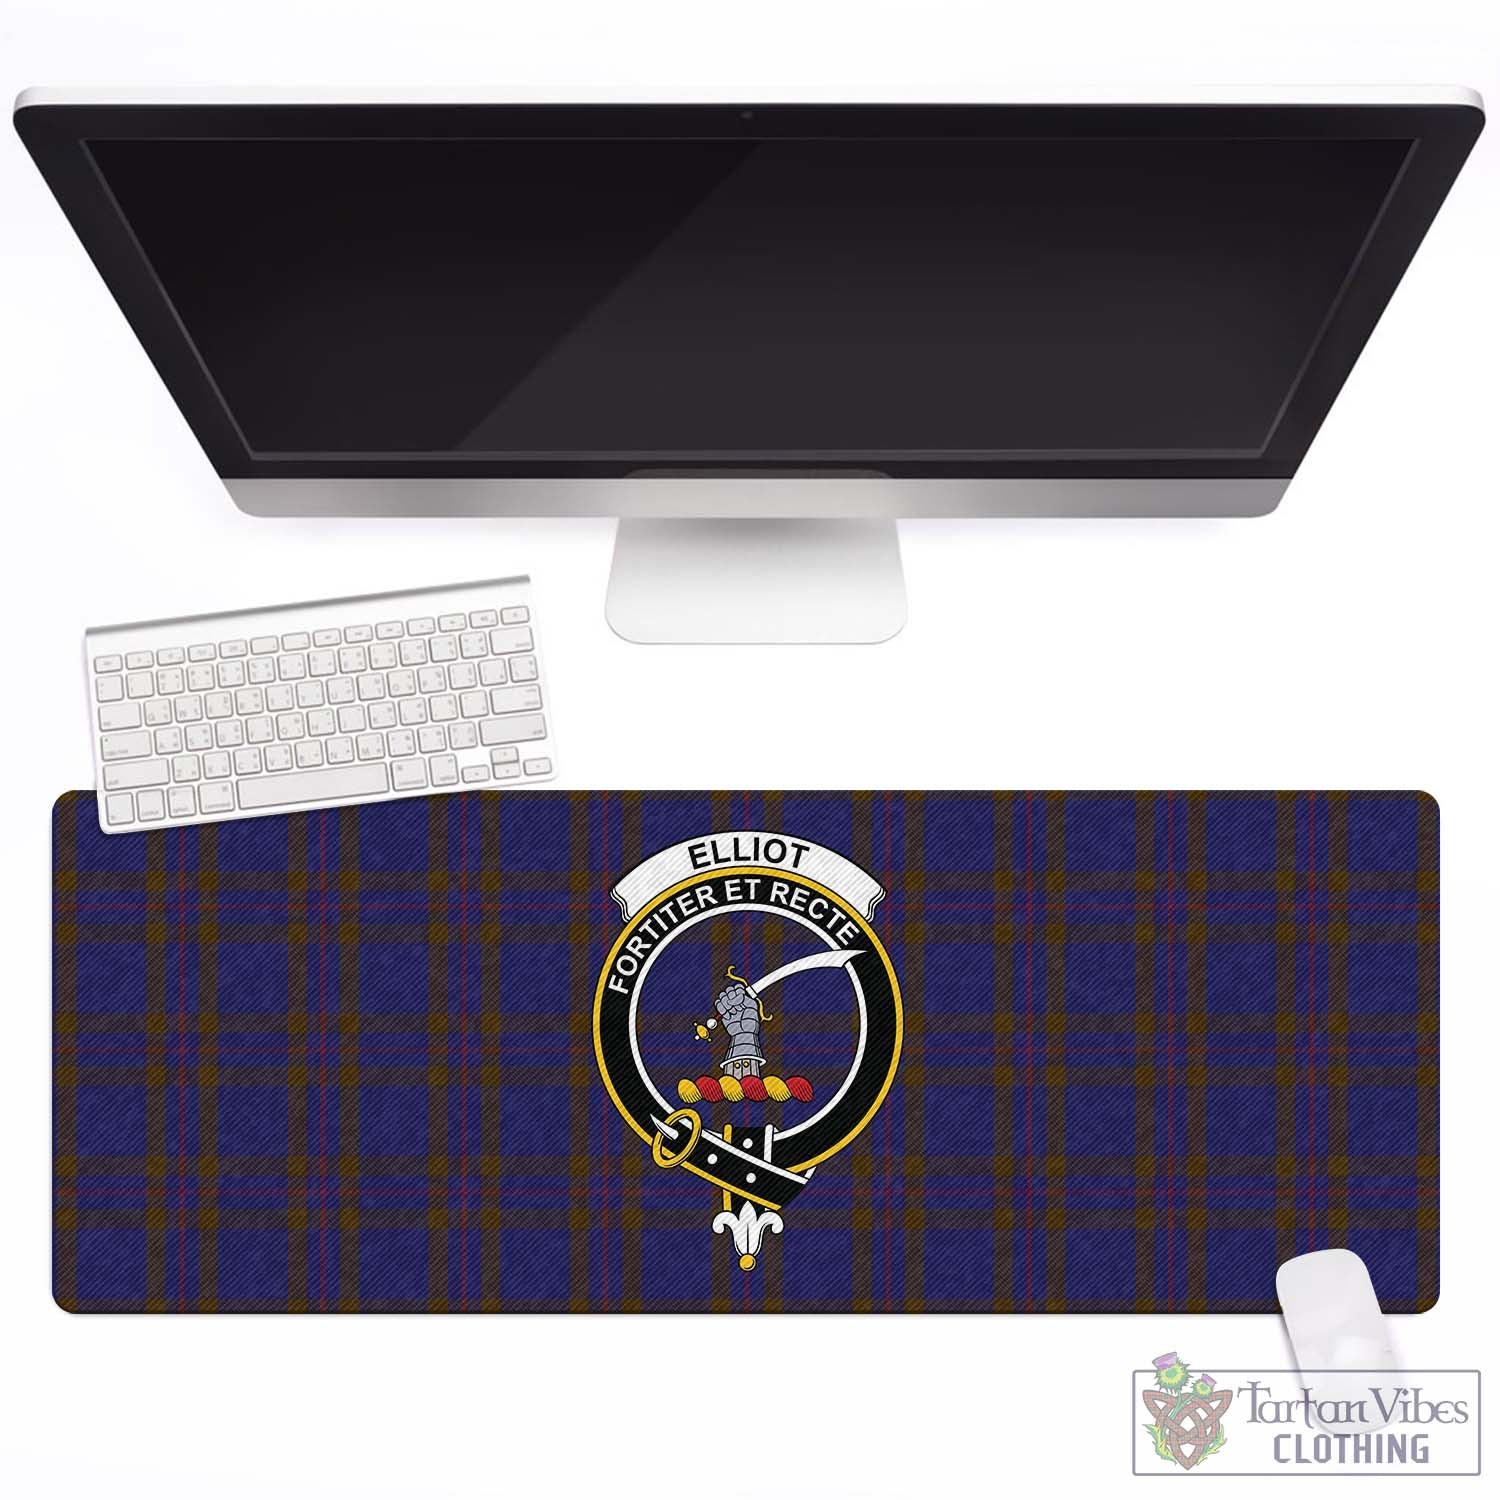 Tartan Vibes Clothing Elliot Tartan Mouse Pad with Family Crest